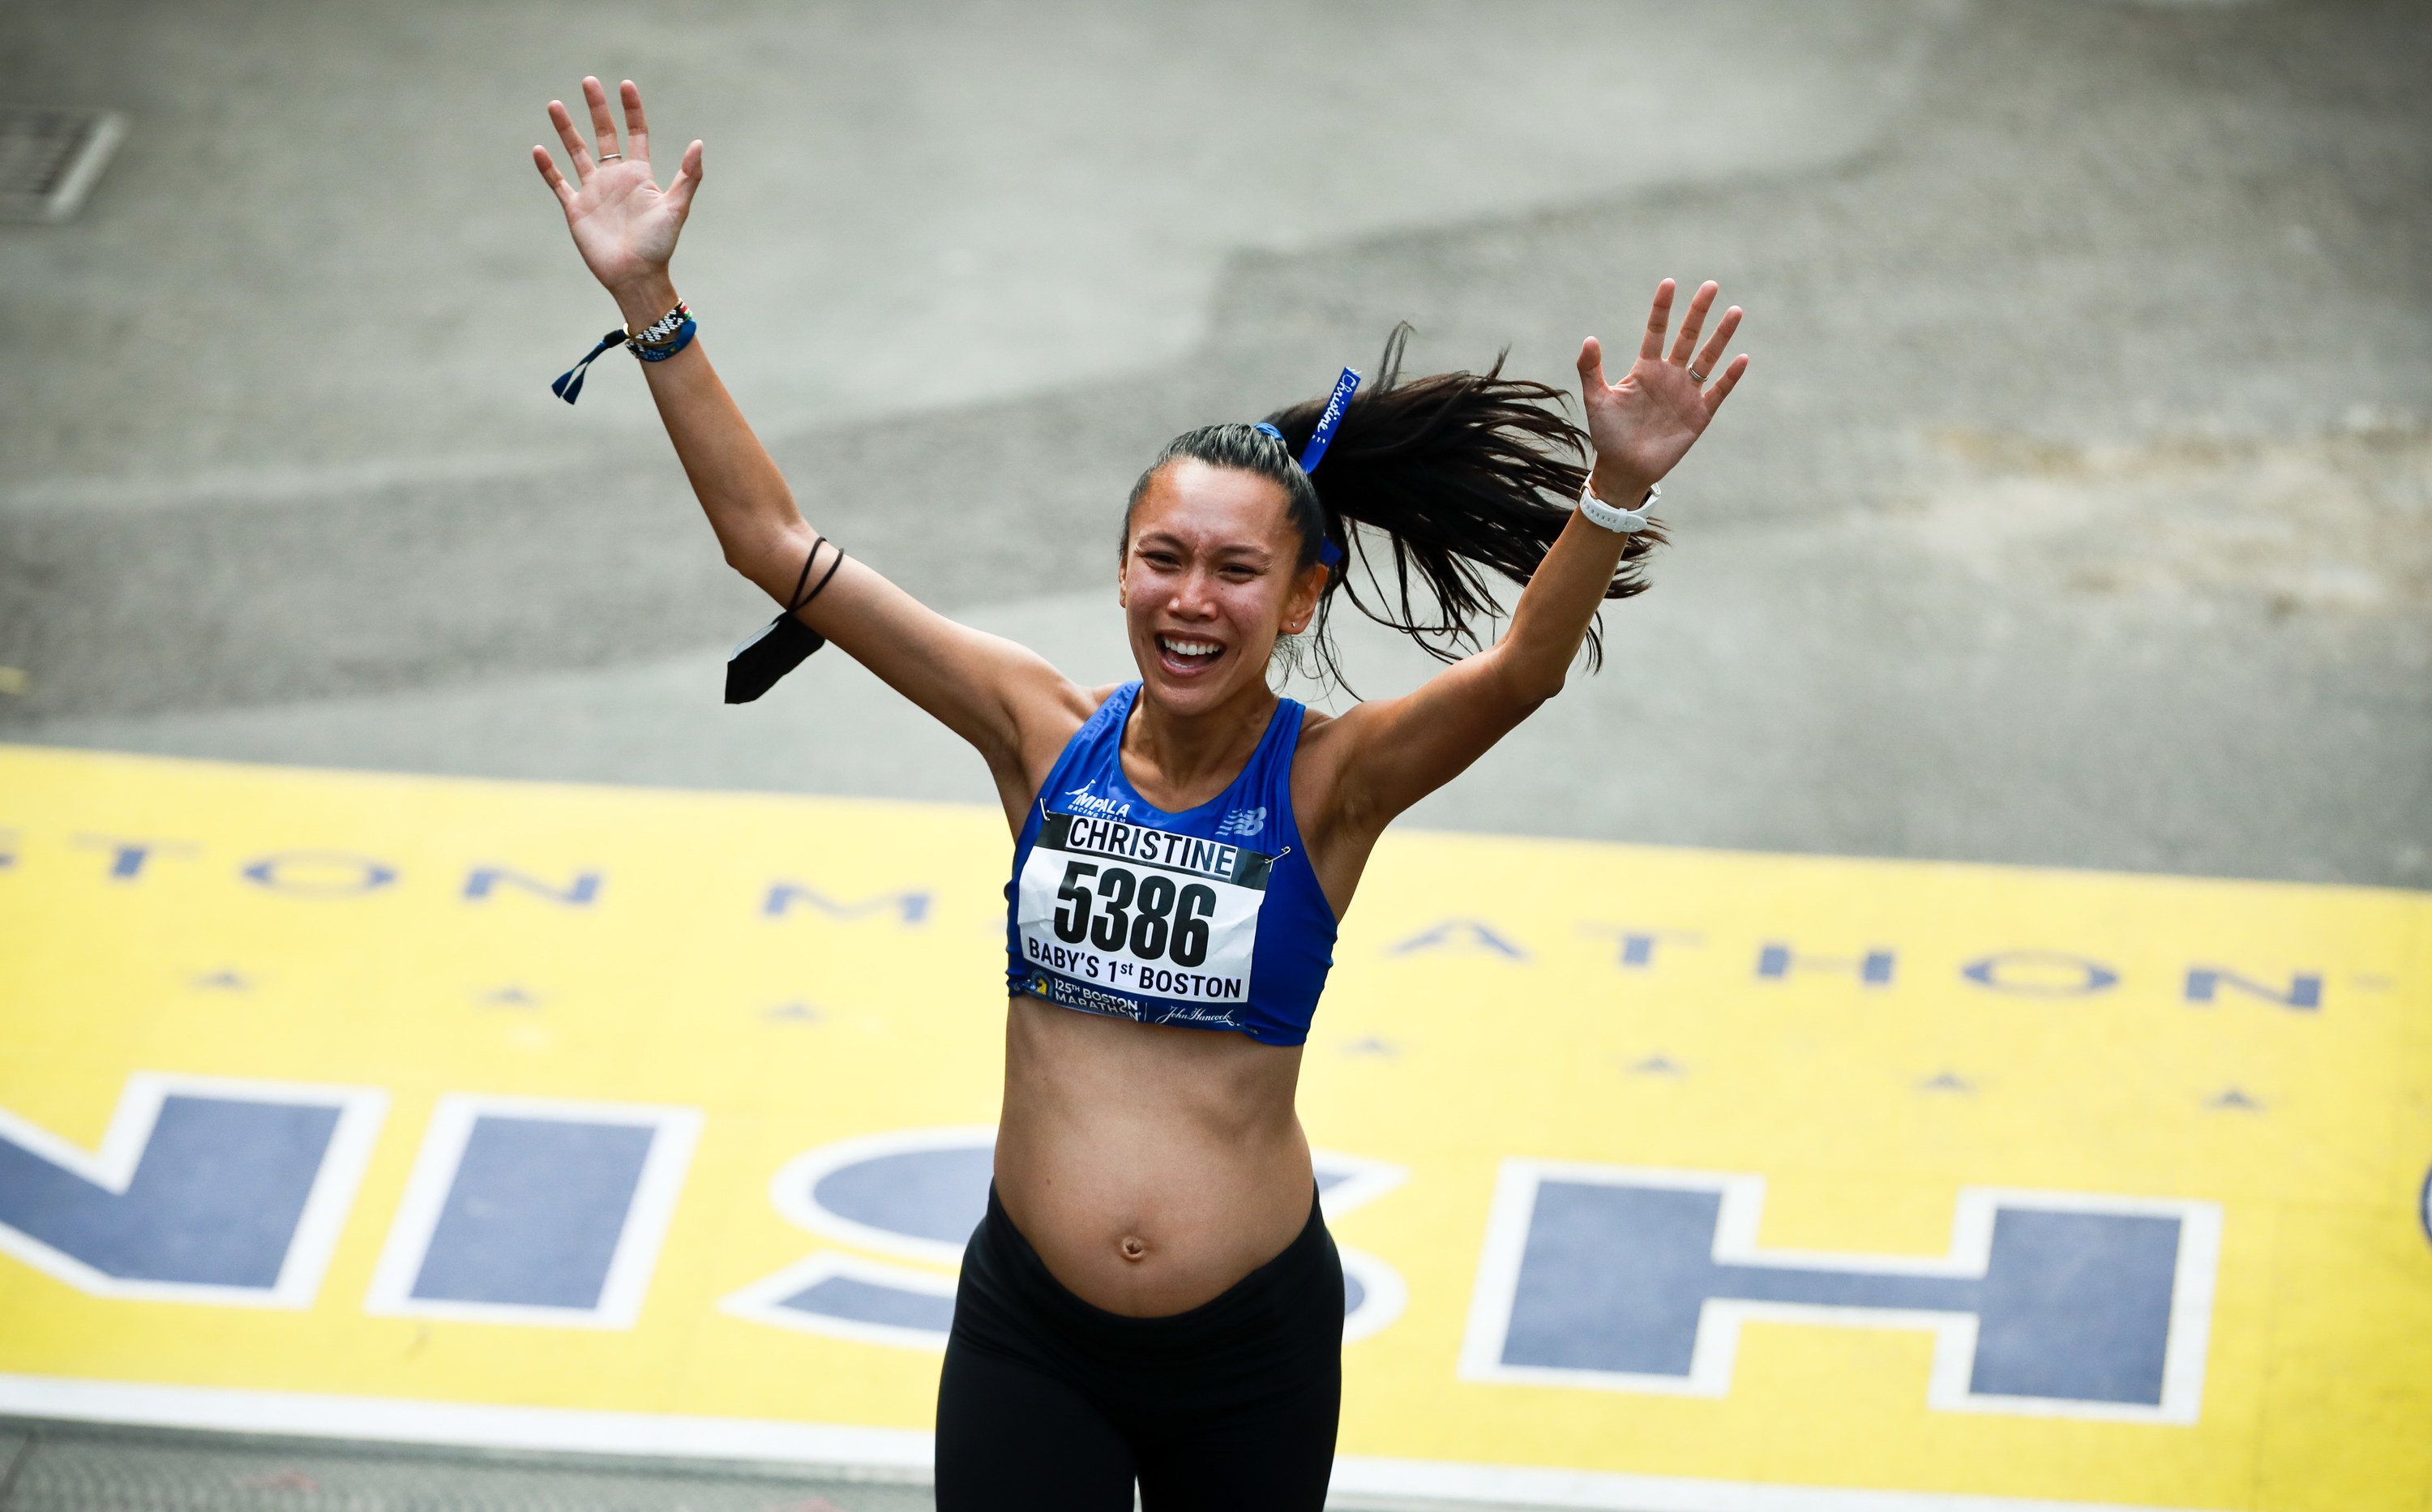 A smiling pregnant woman with her hands up crosses the finish line of a race